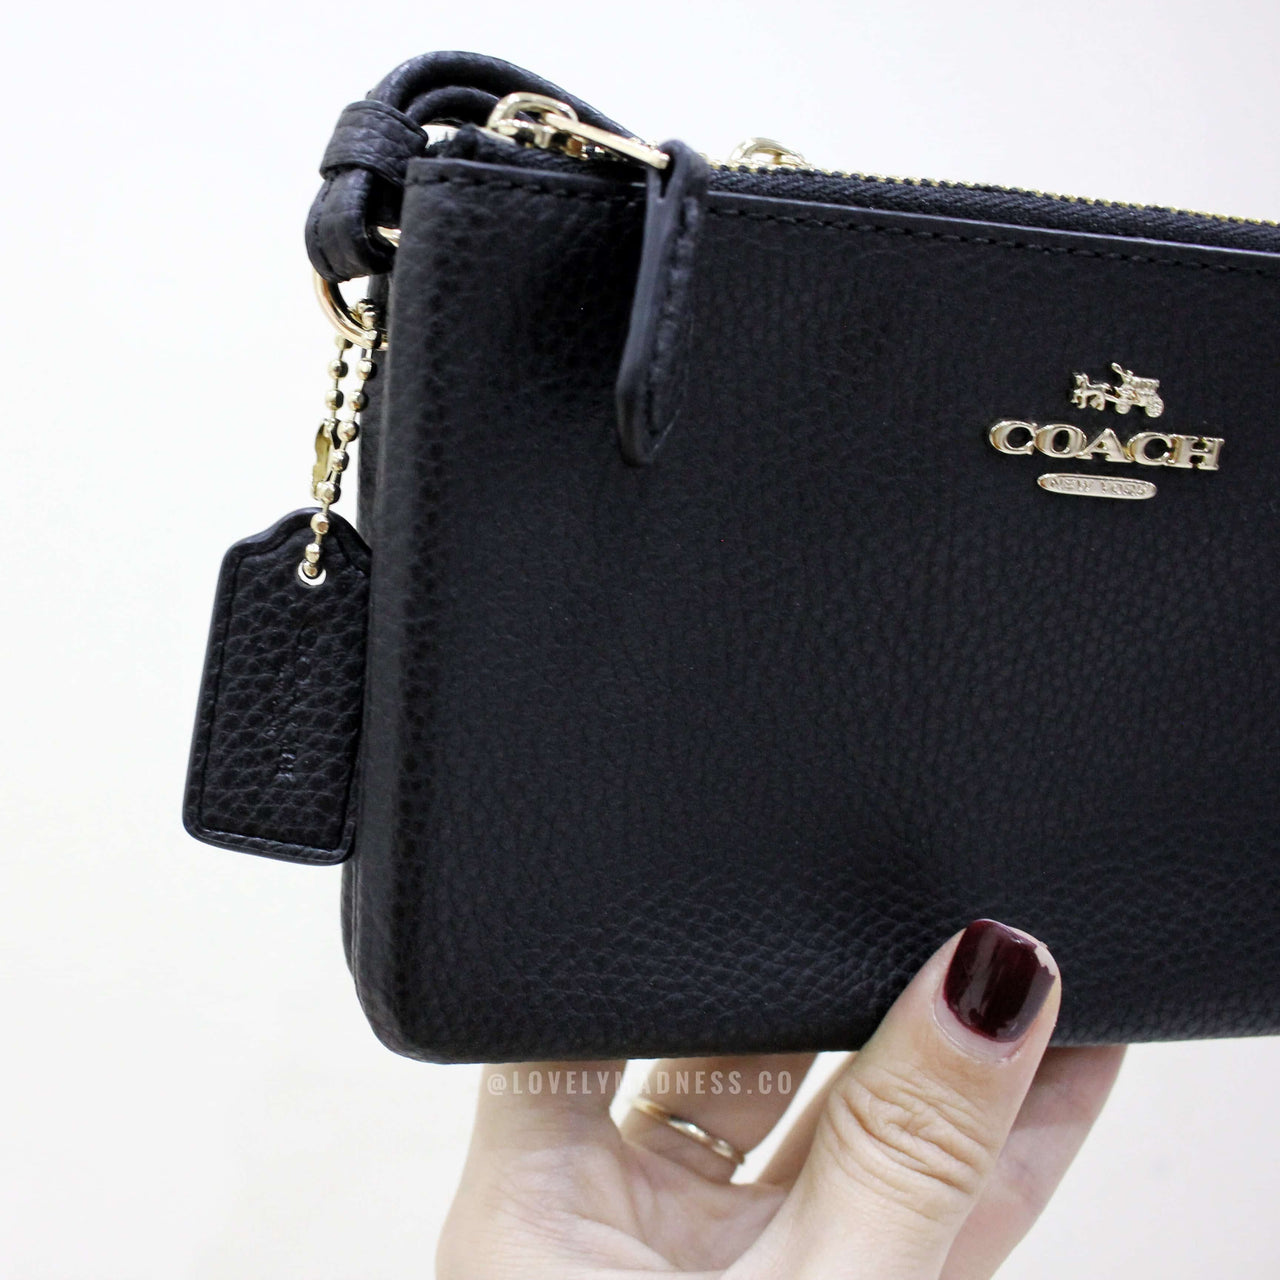 COACH DOUBLE CORNER ZIP WALLET POLISHED PEBBLE LEATHER - LovelyMadness Clothing Malaysia